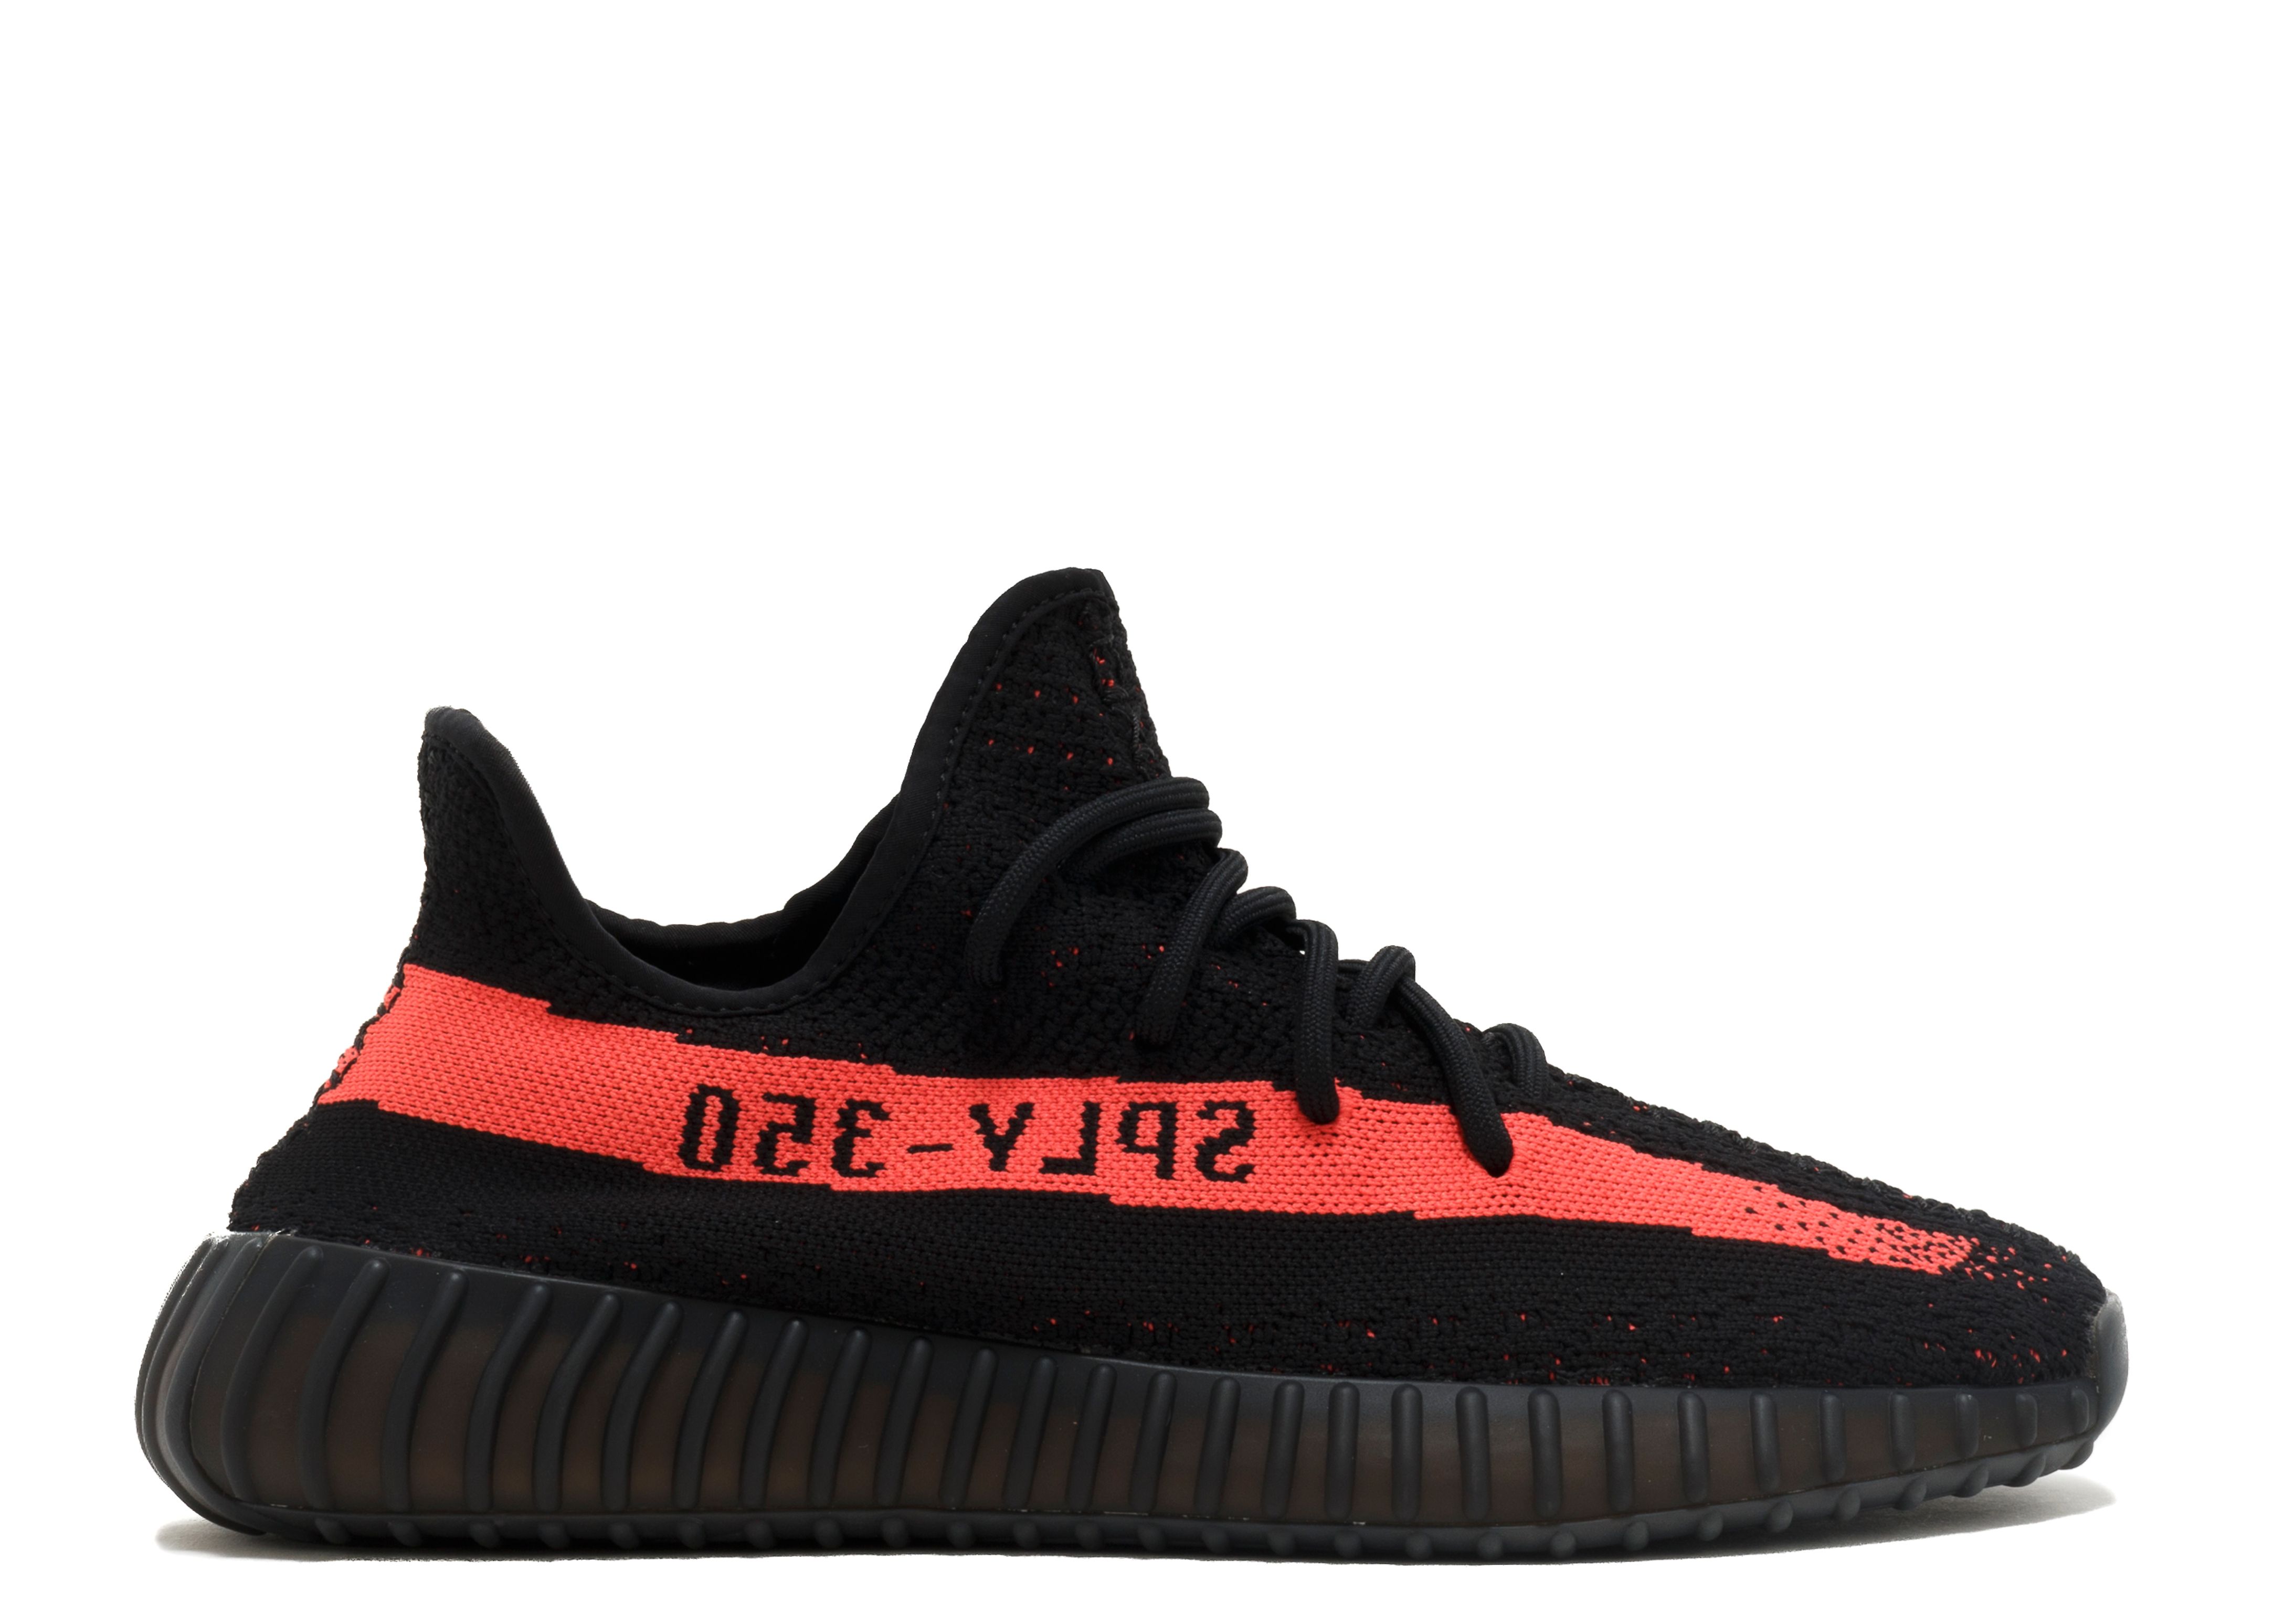 Adidas yeezy boost 350 v2 'black red' raffle CP 9652 Womens Shoes In